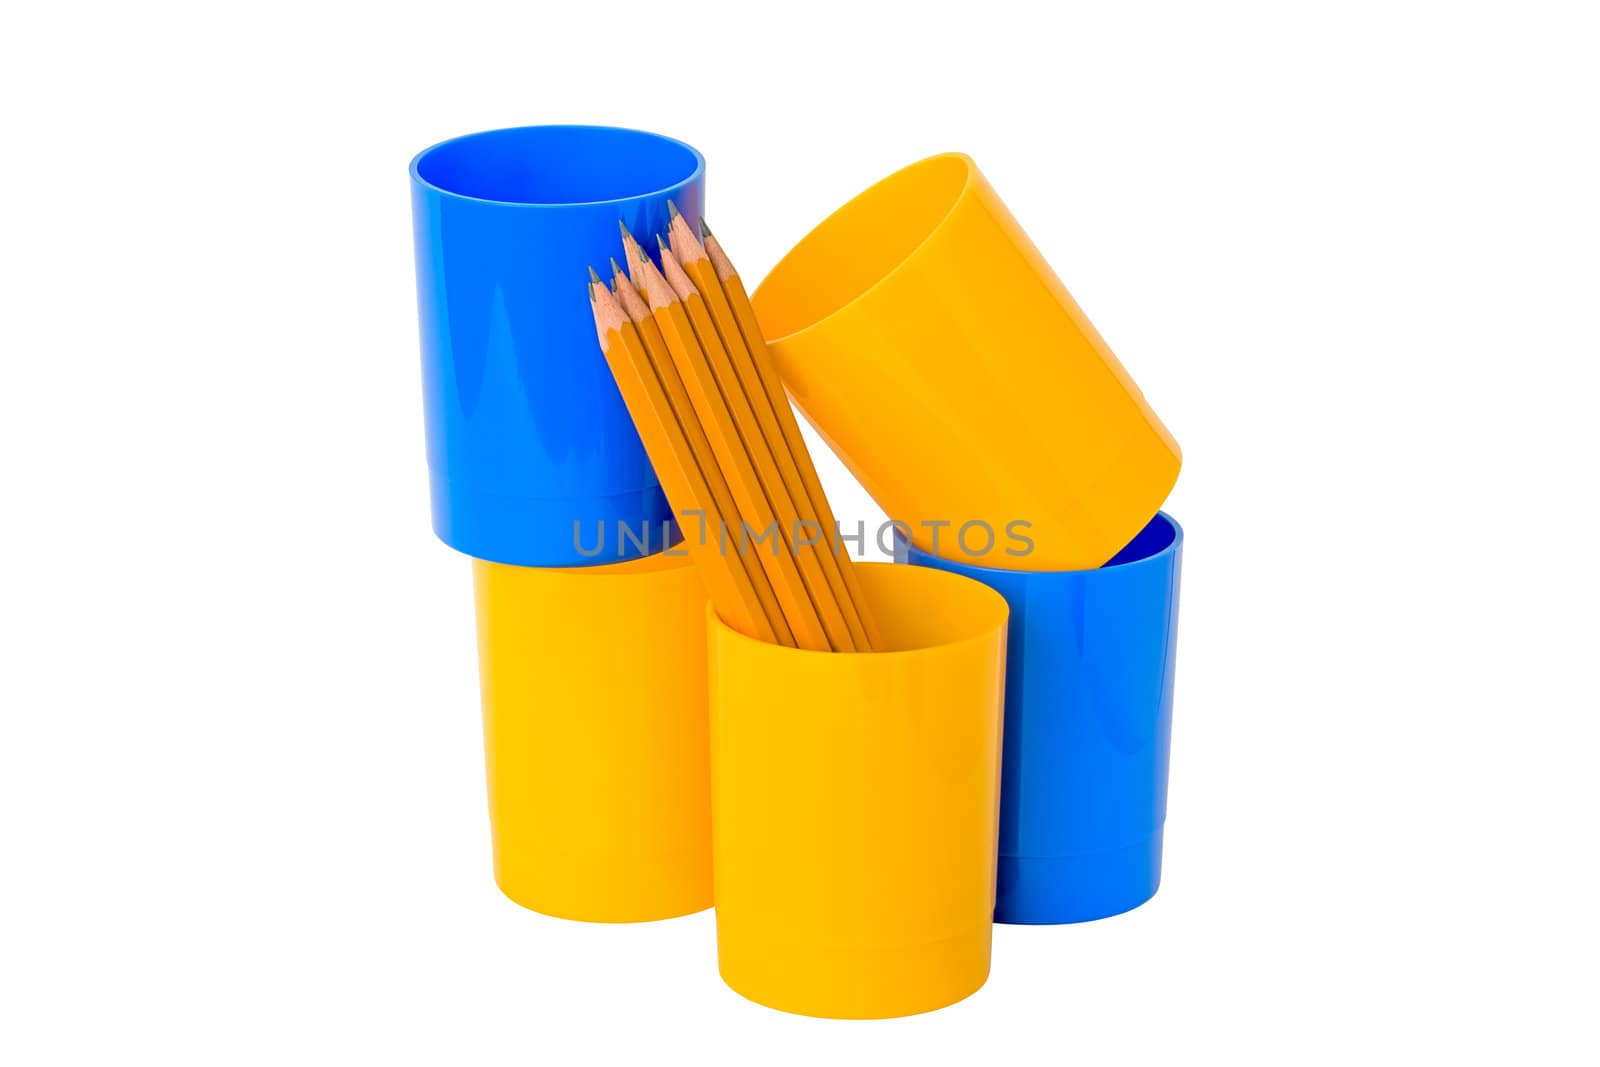 Plastic chups with pencils isolated on a white background.